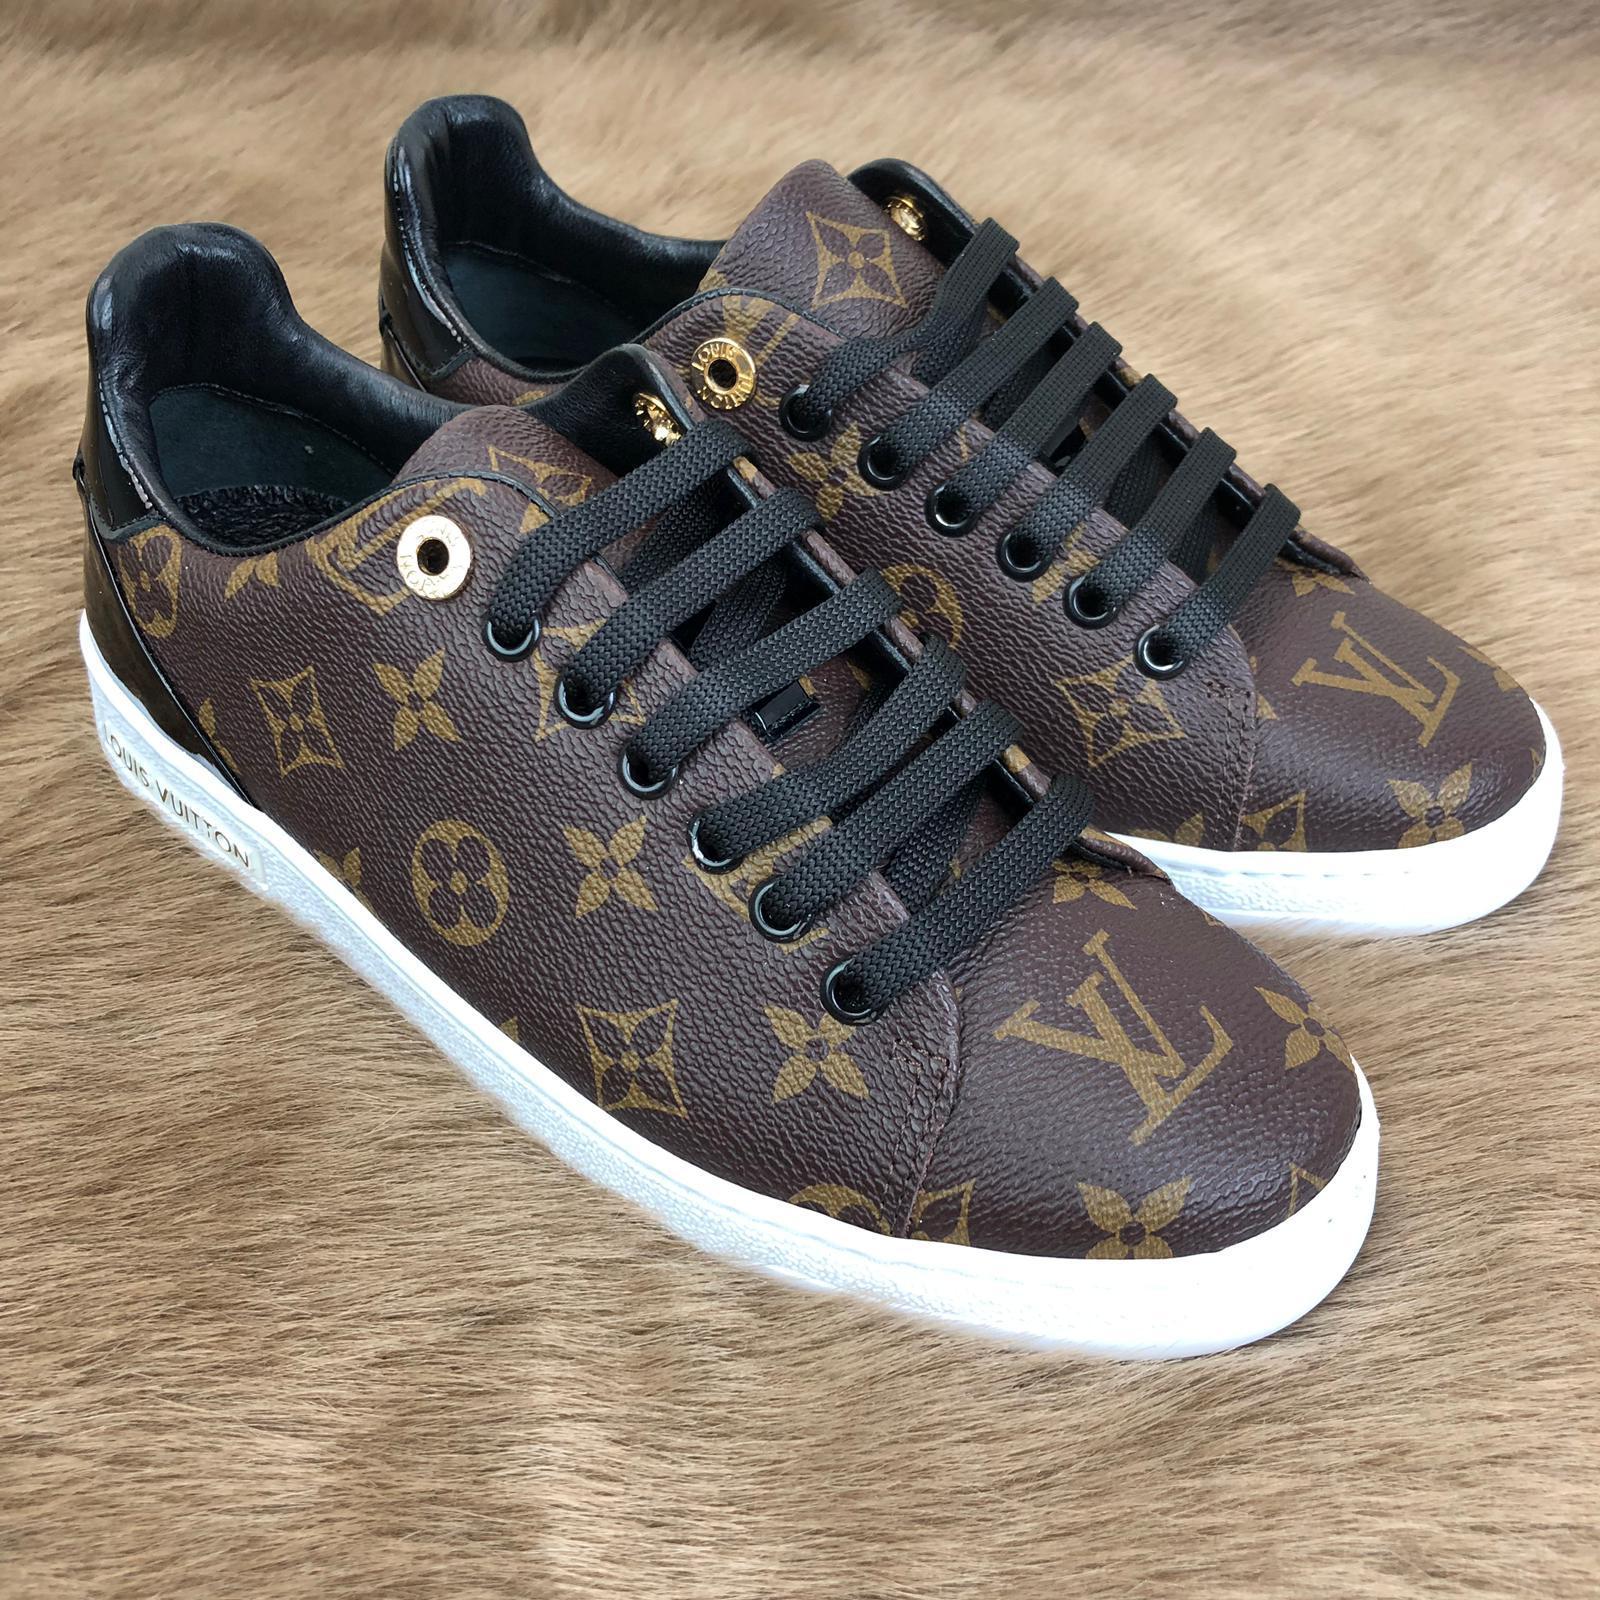 sneakers front row louis vuitton